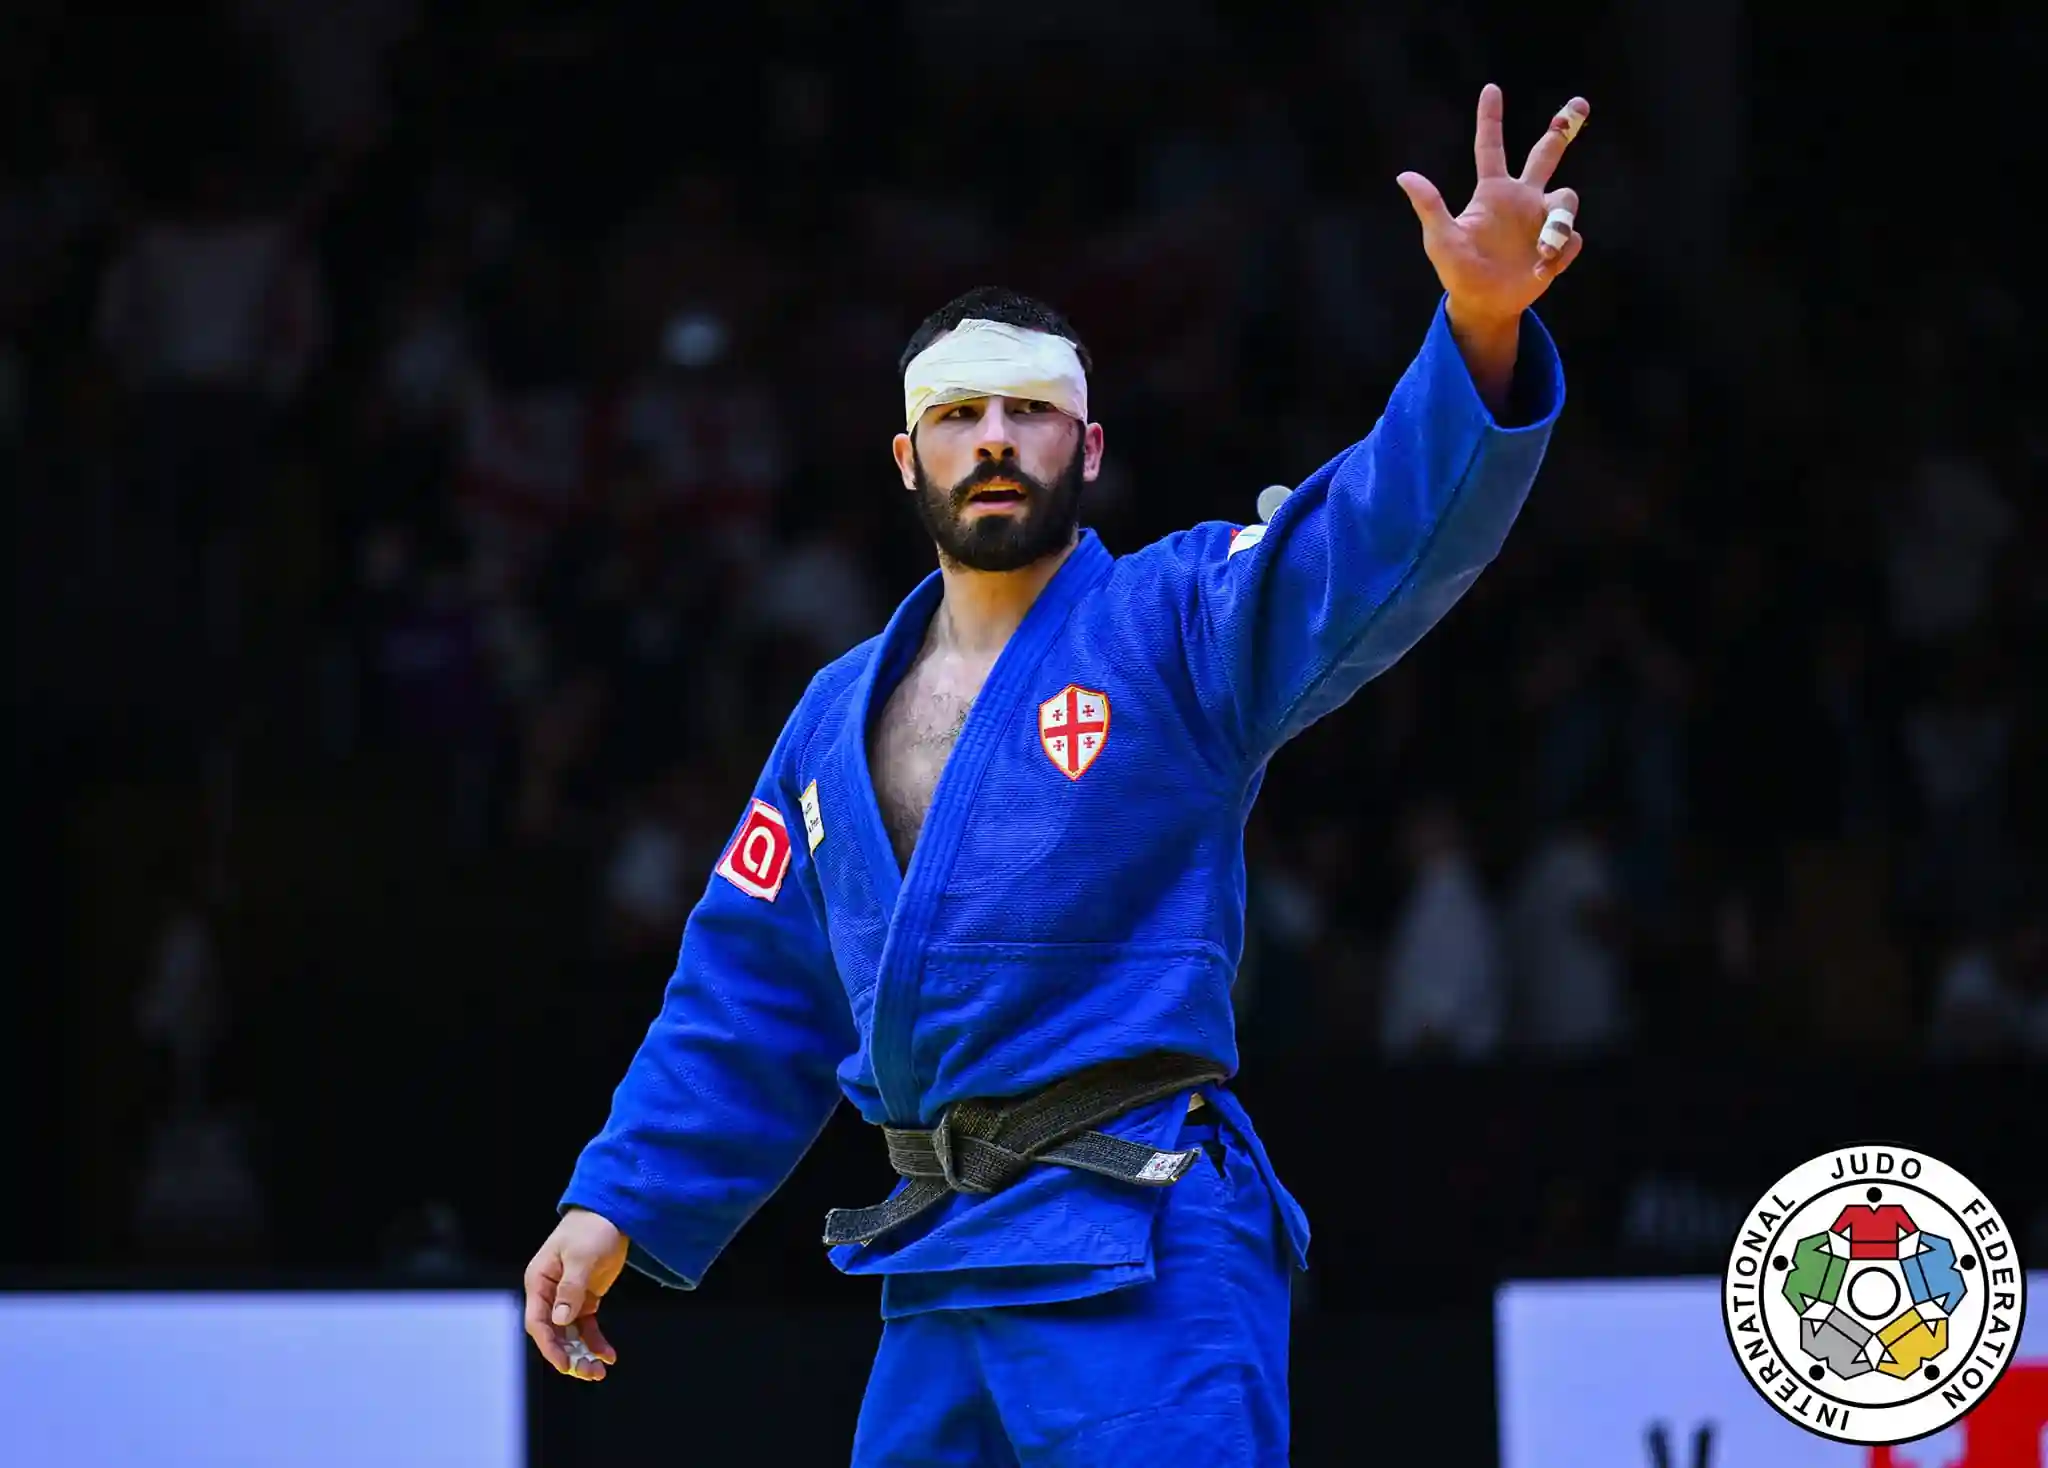 Tato Grigalashvili becomes world champion for third time in row